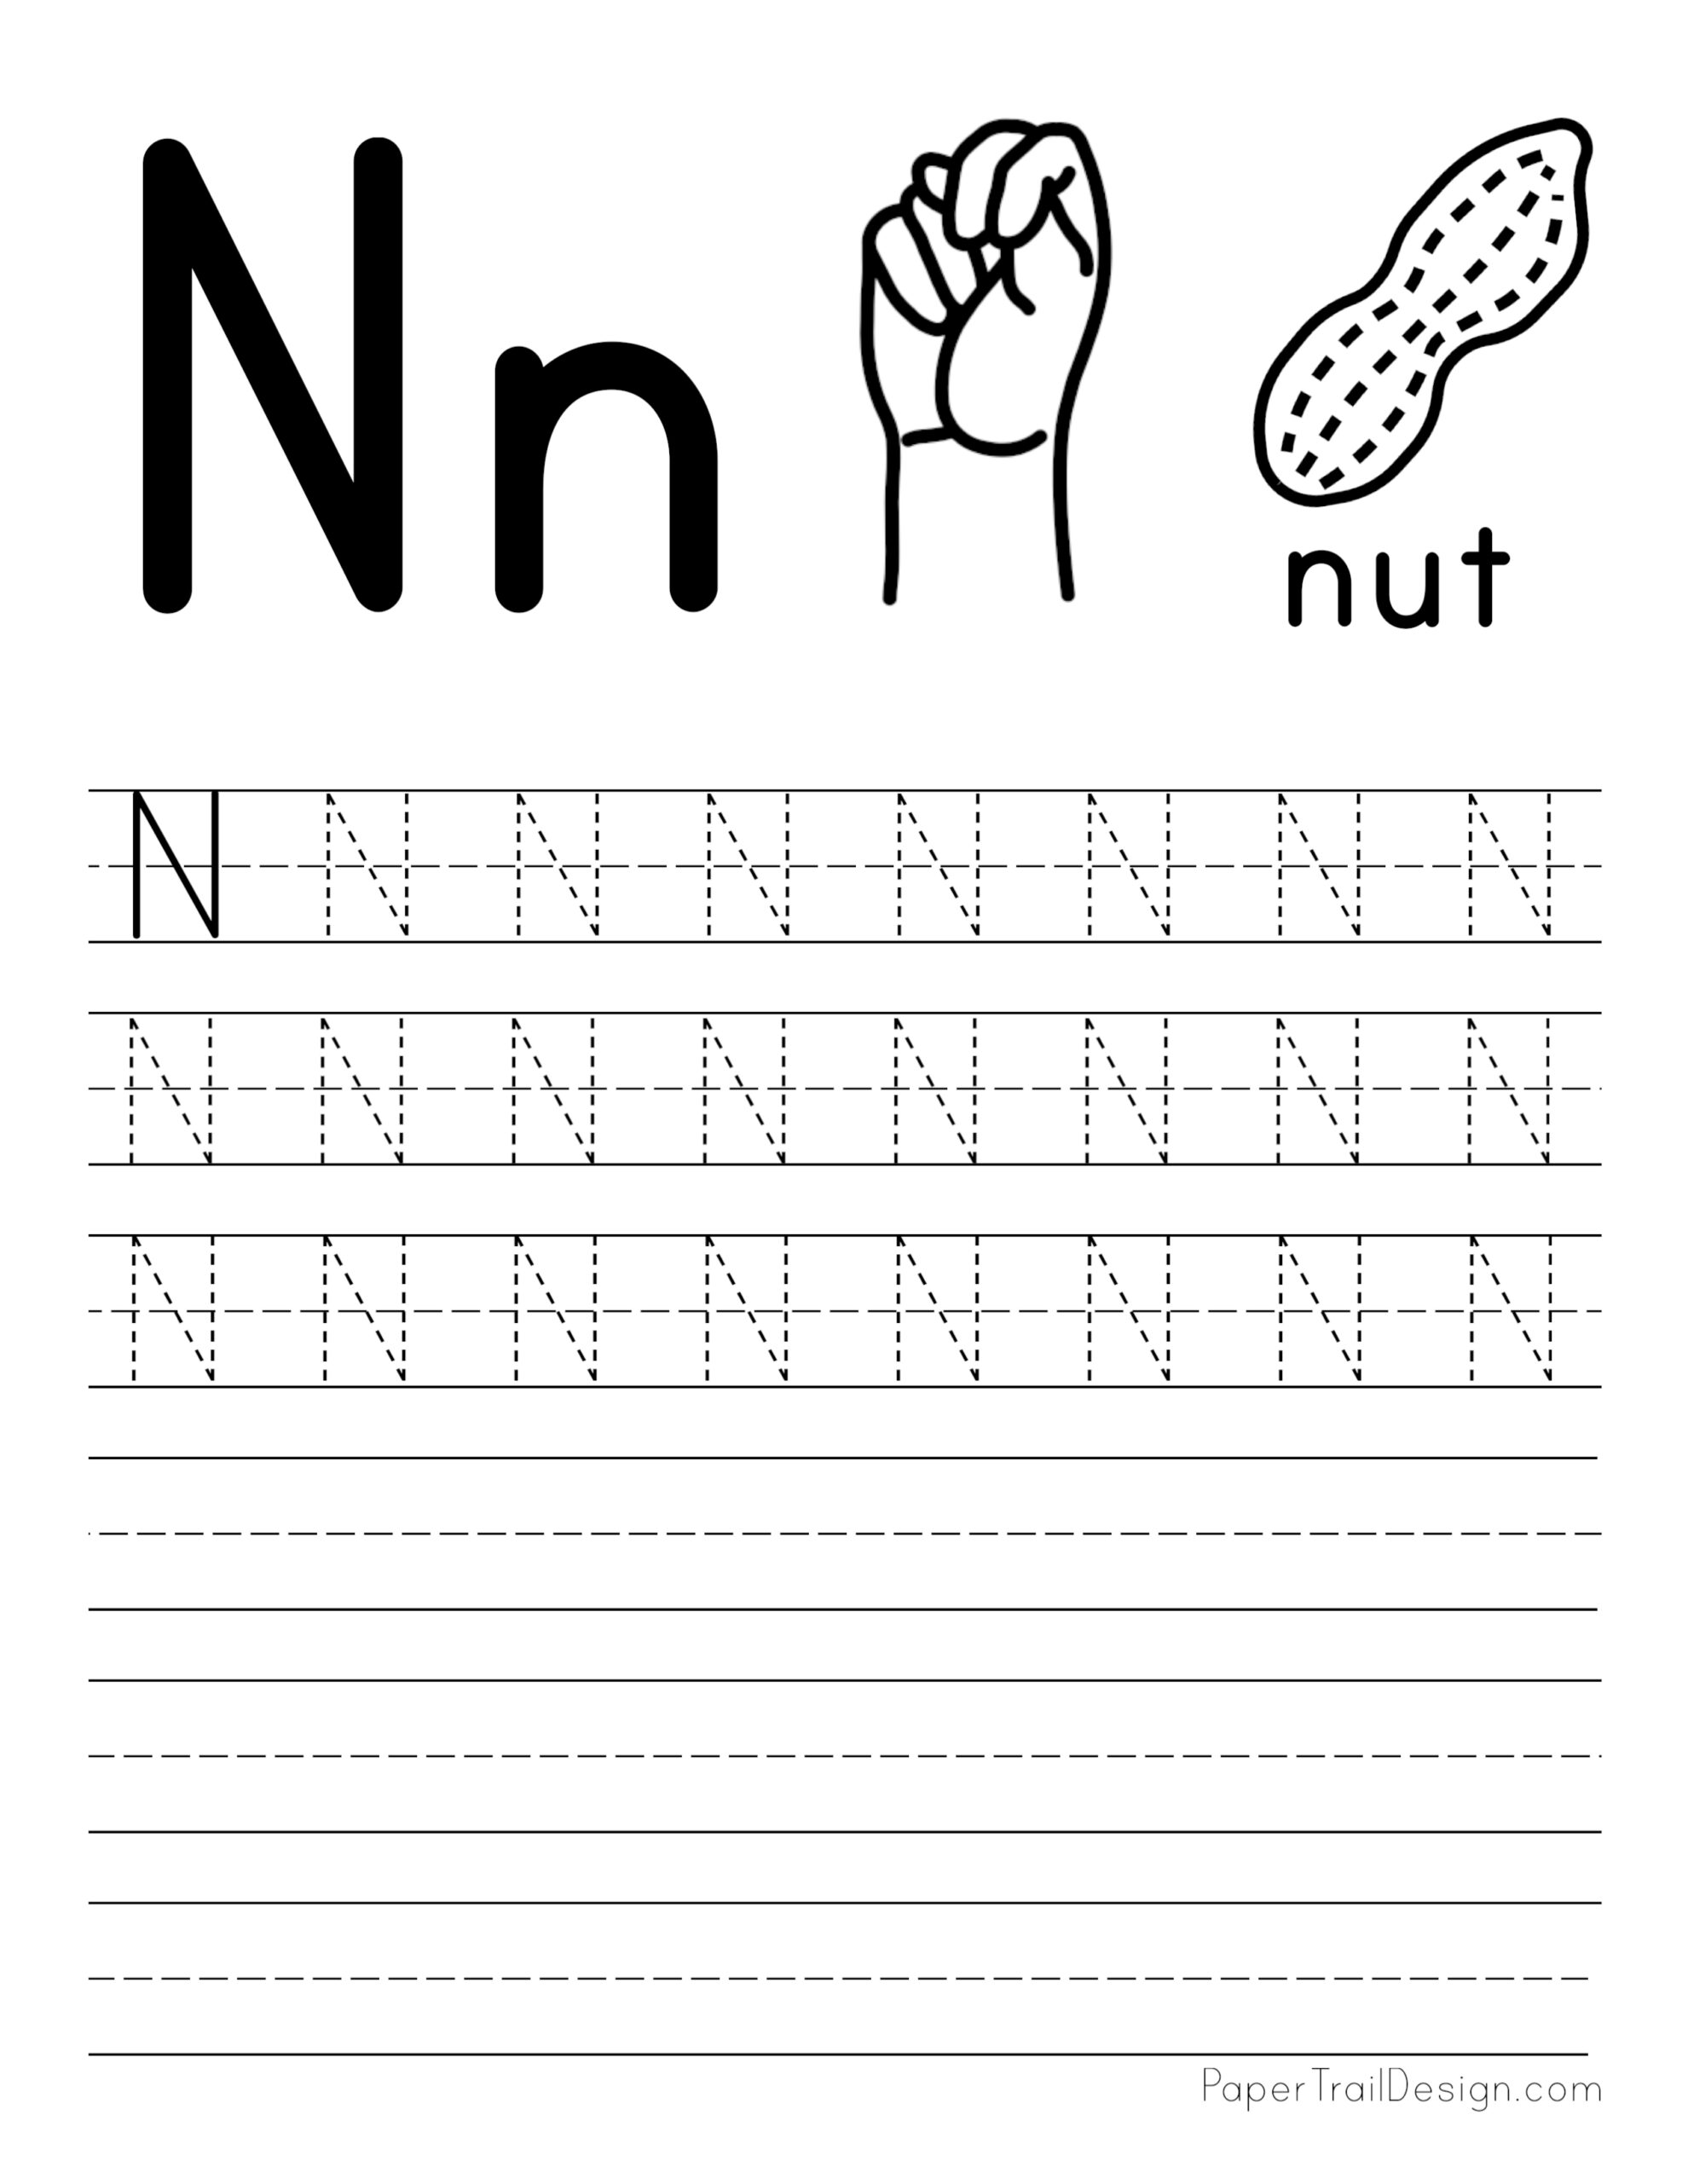 capital-letter-n-tracing-worksheet-printable-form-templates-and-letter